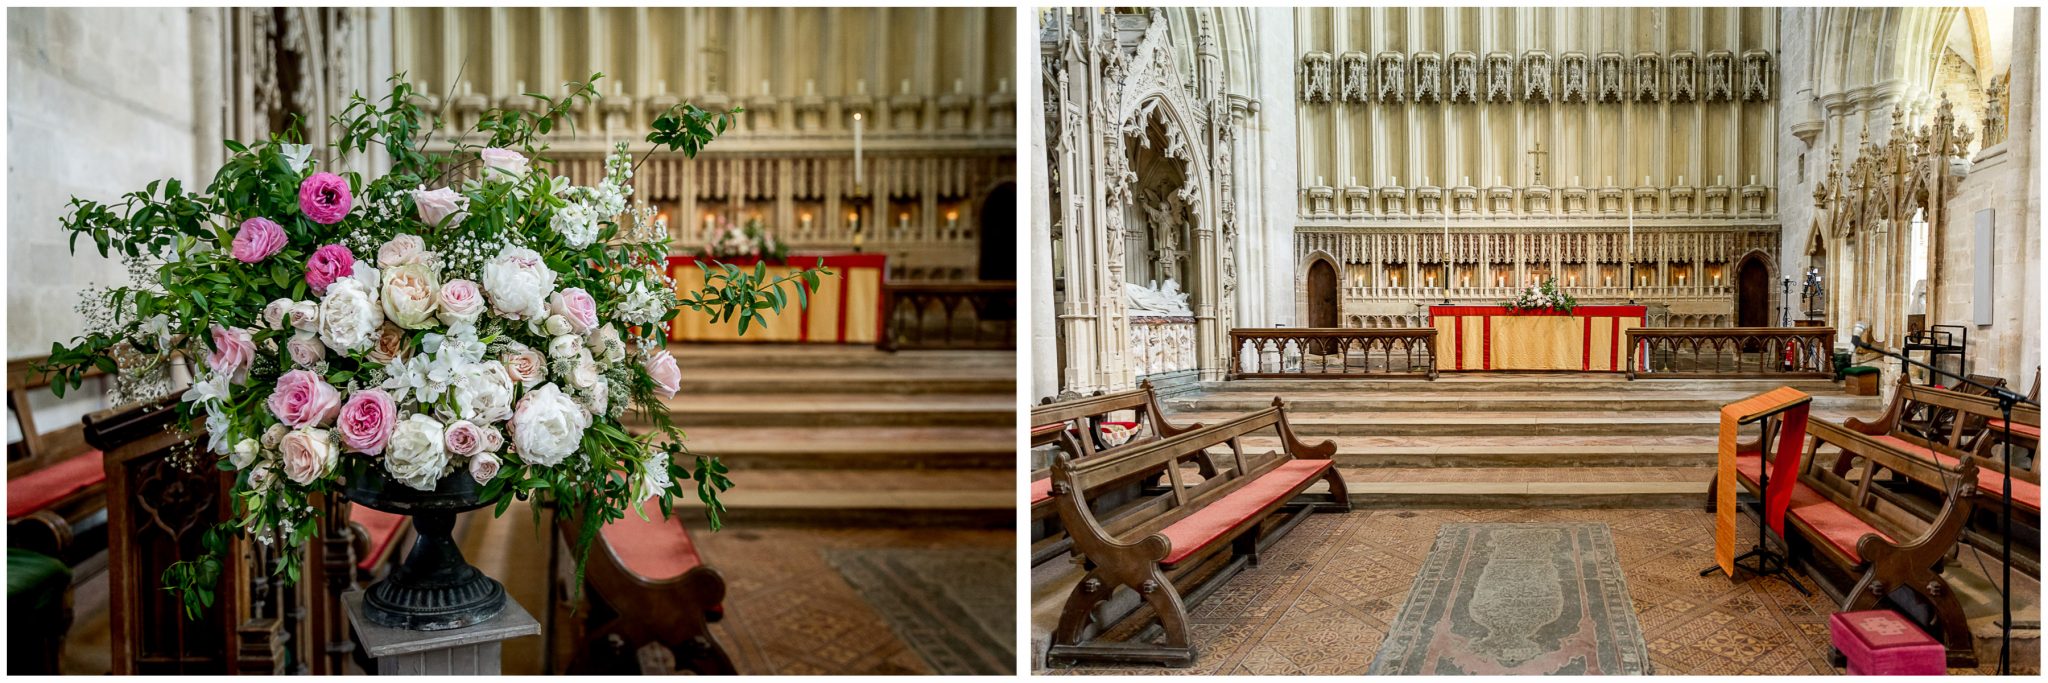 Interior images of Milton Abbey prepared for a wedding service